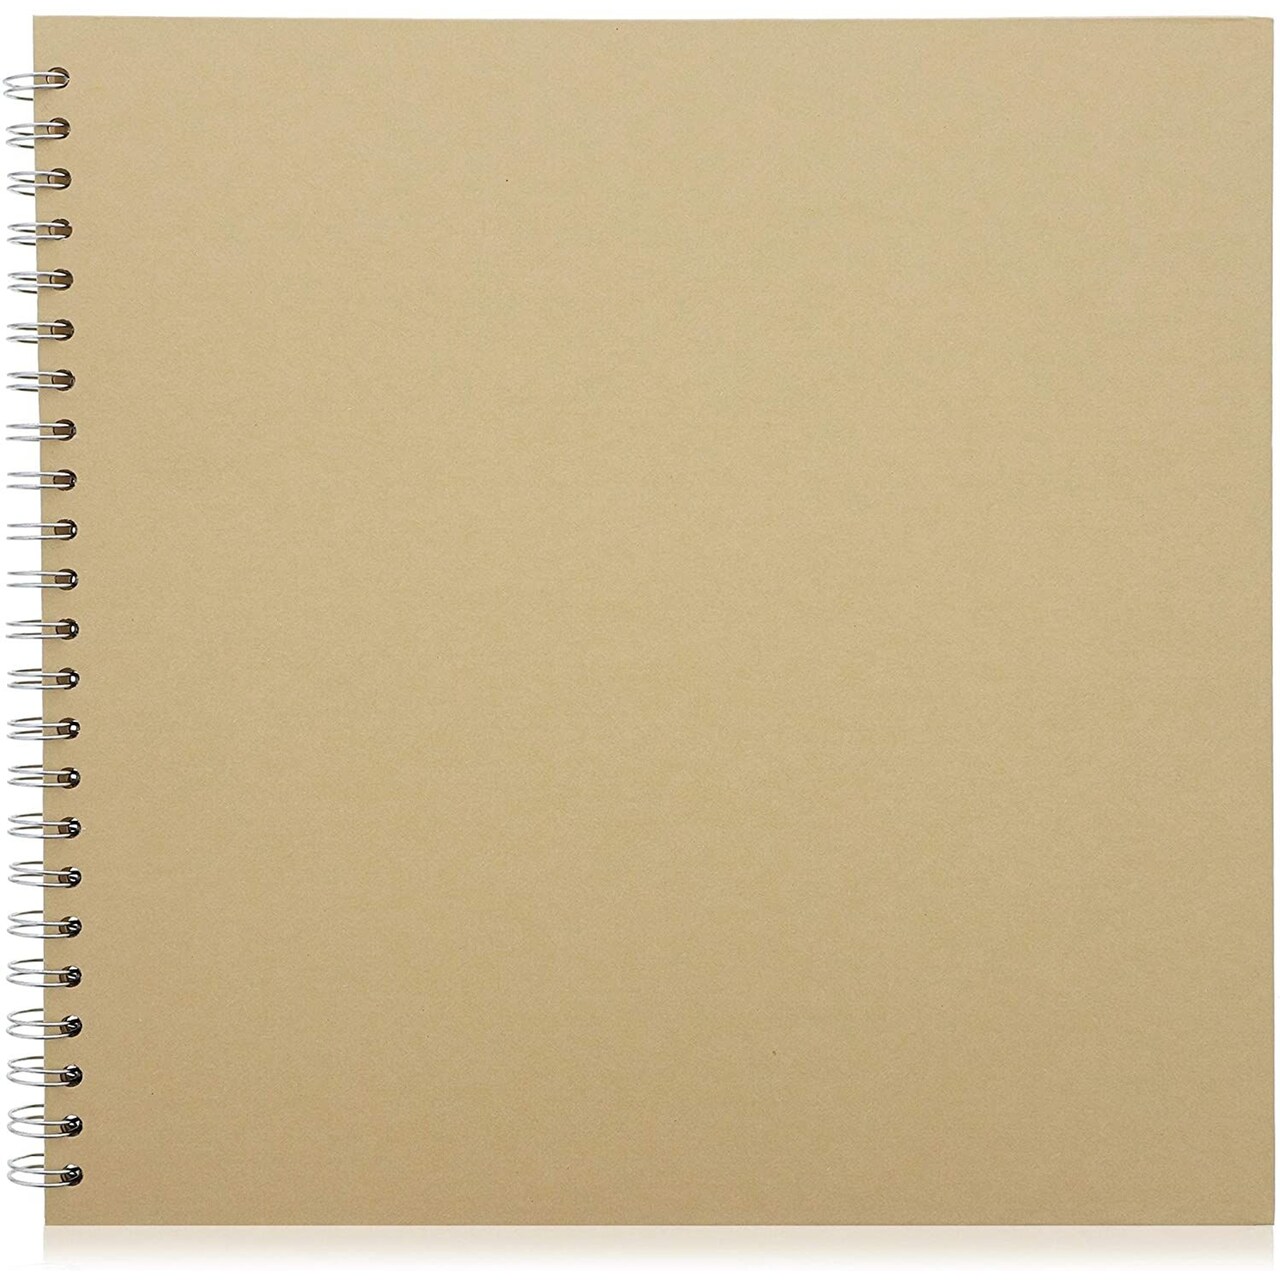 12x12 Album for Scrapbooking Hardcover, Kraft Paper Material Spiral Bound  Sketchbook for Drawing, Writing, Arts and Crafts Projects, Home, Office,  School (40 Sheets Total)